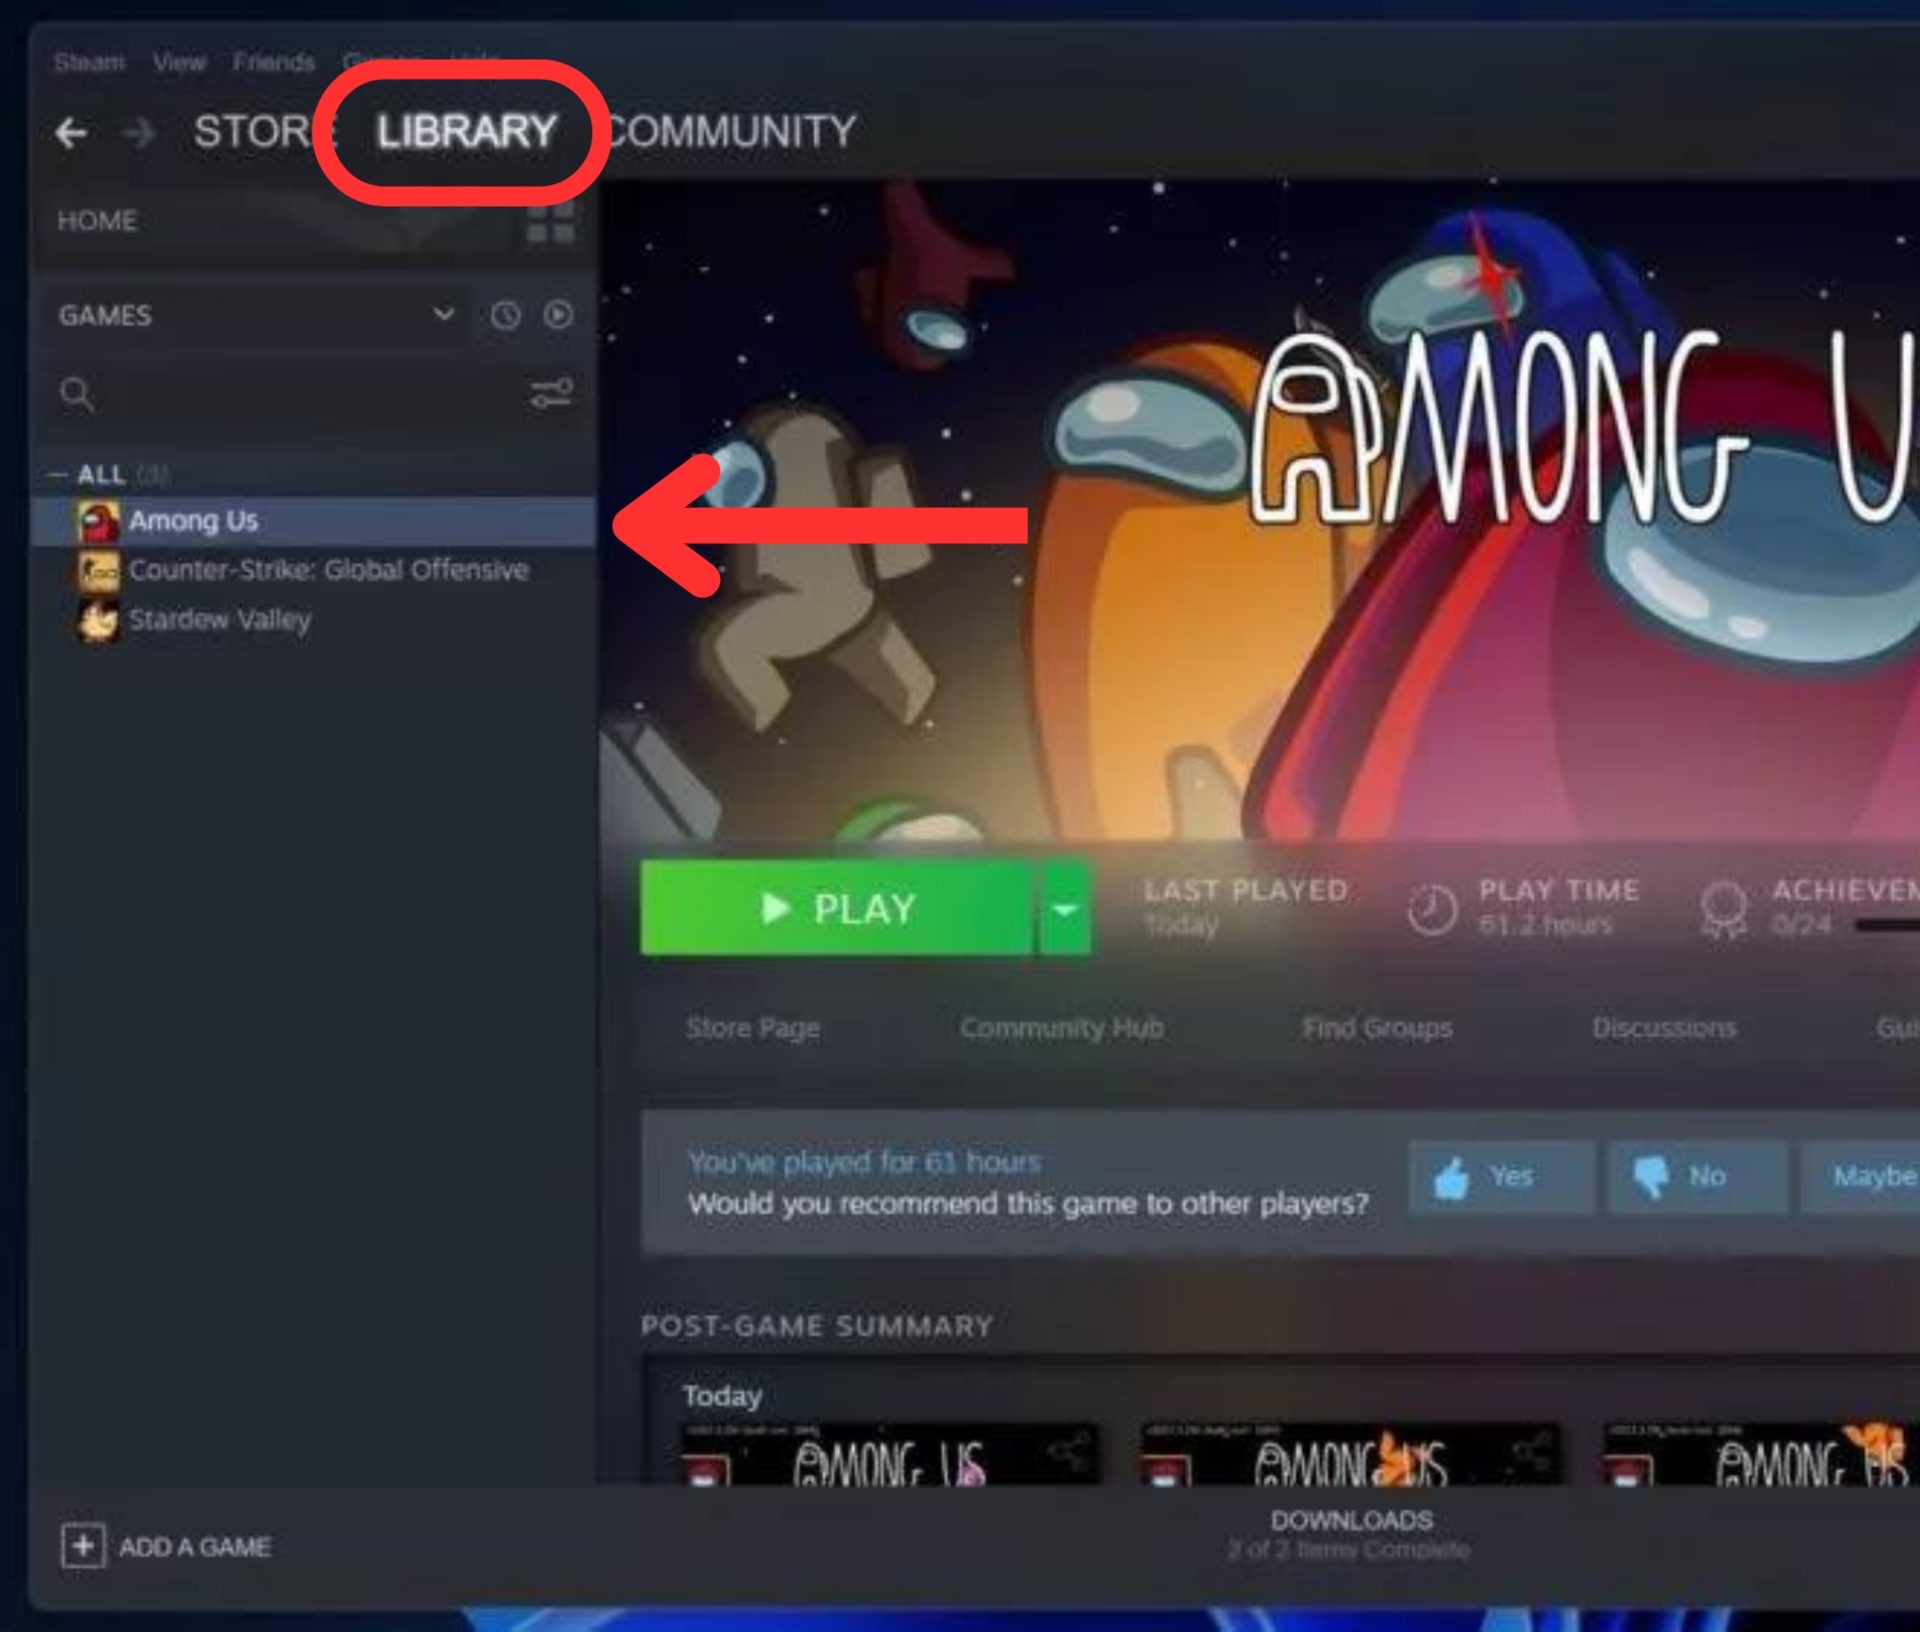 Yes, this steam account has every game